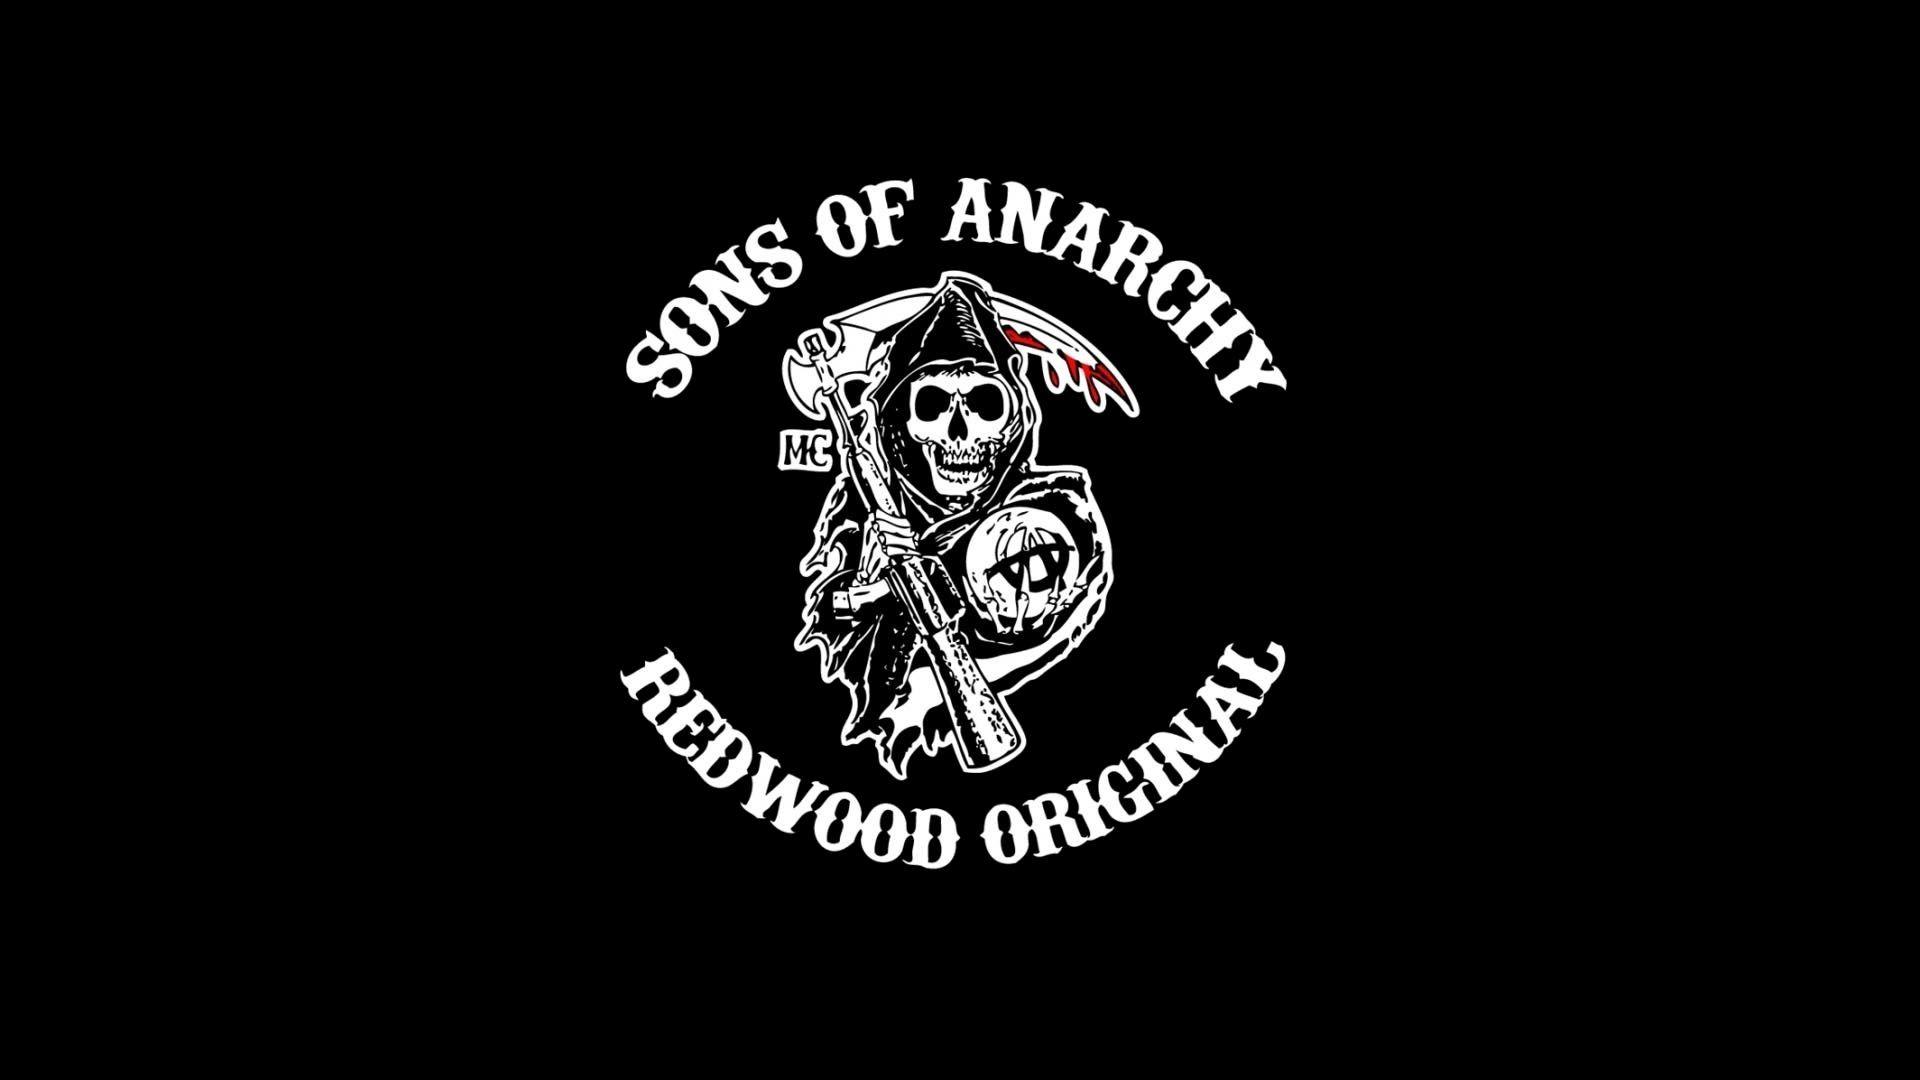 Sons of Anarchy Logo Wallpapers - Top Free Sons of Anarchy Logo